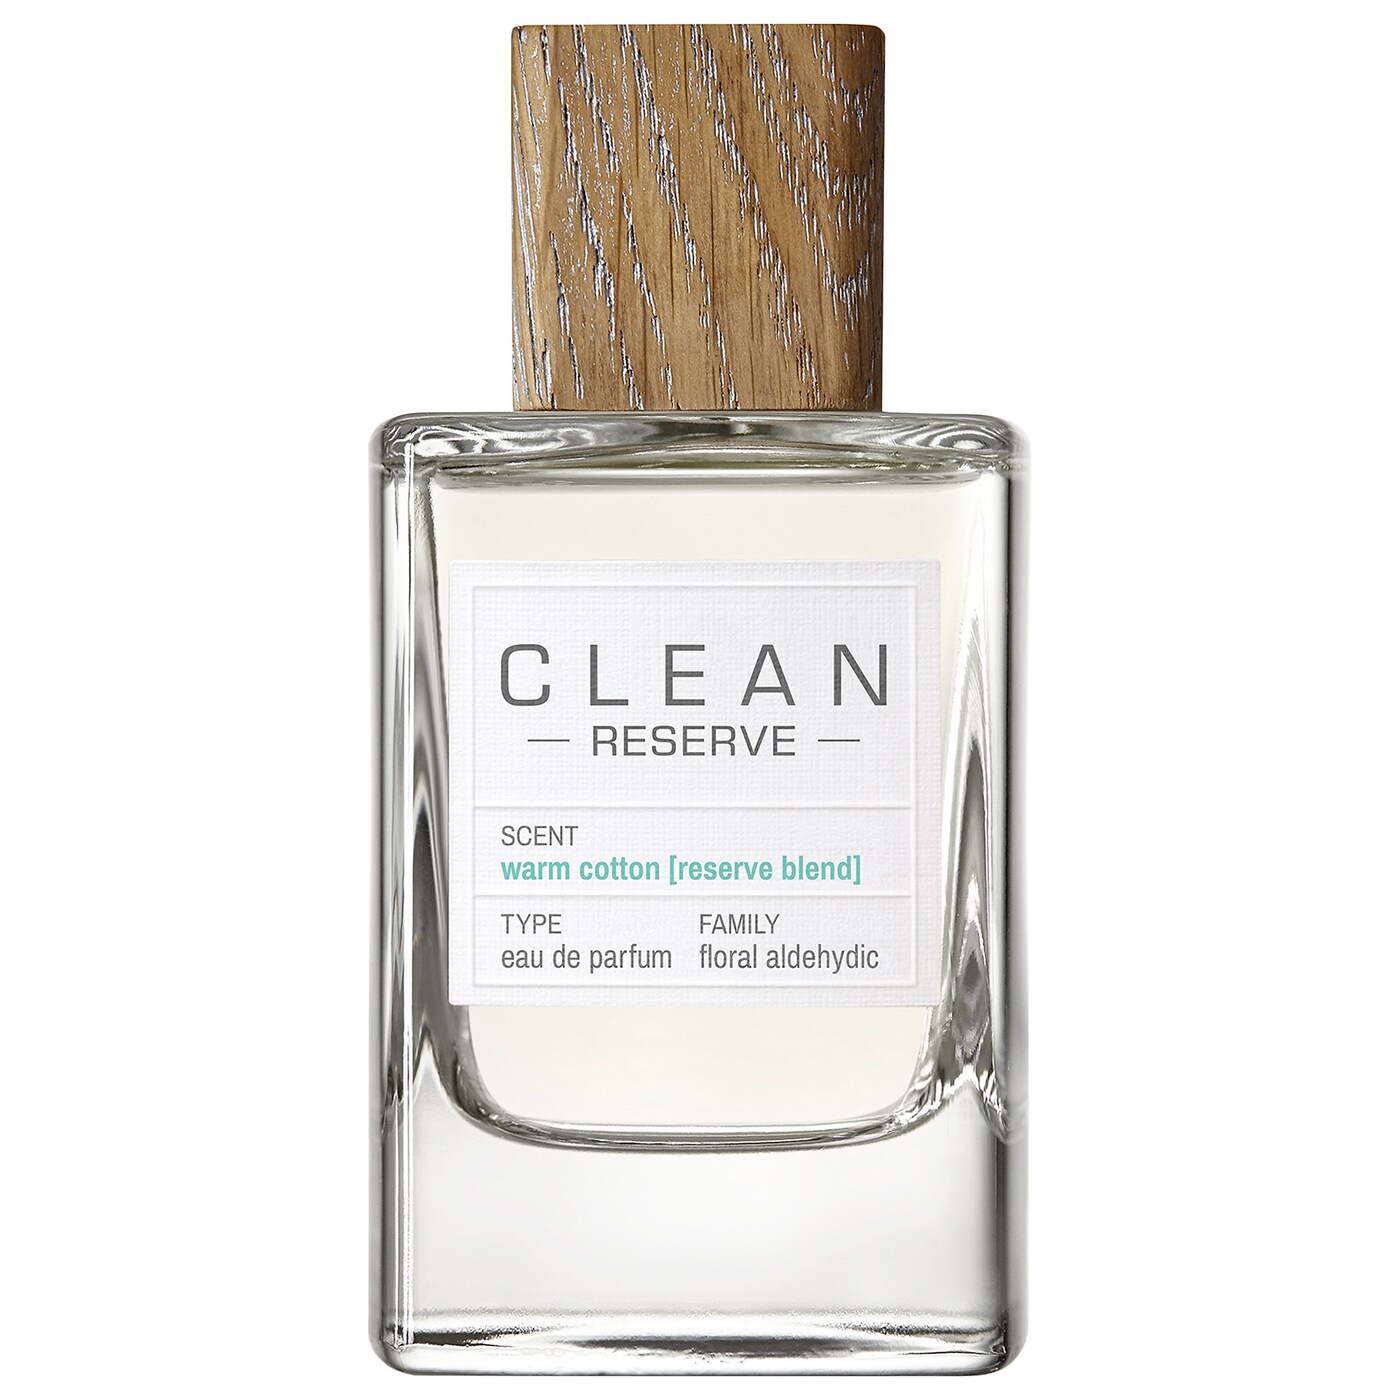 warm cotton perfume by clean